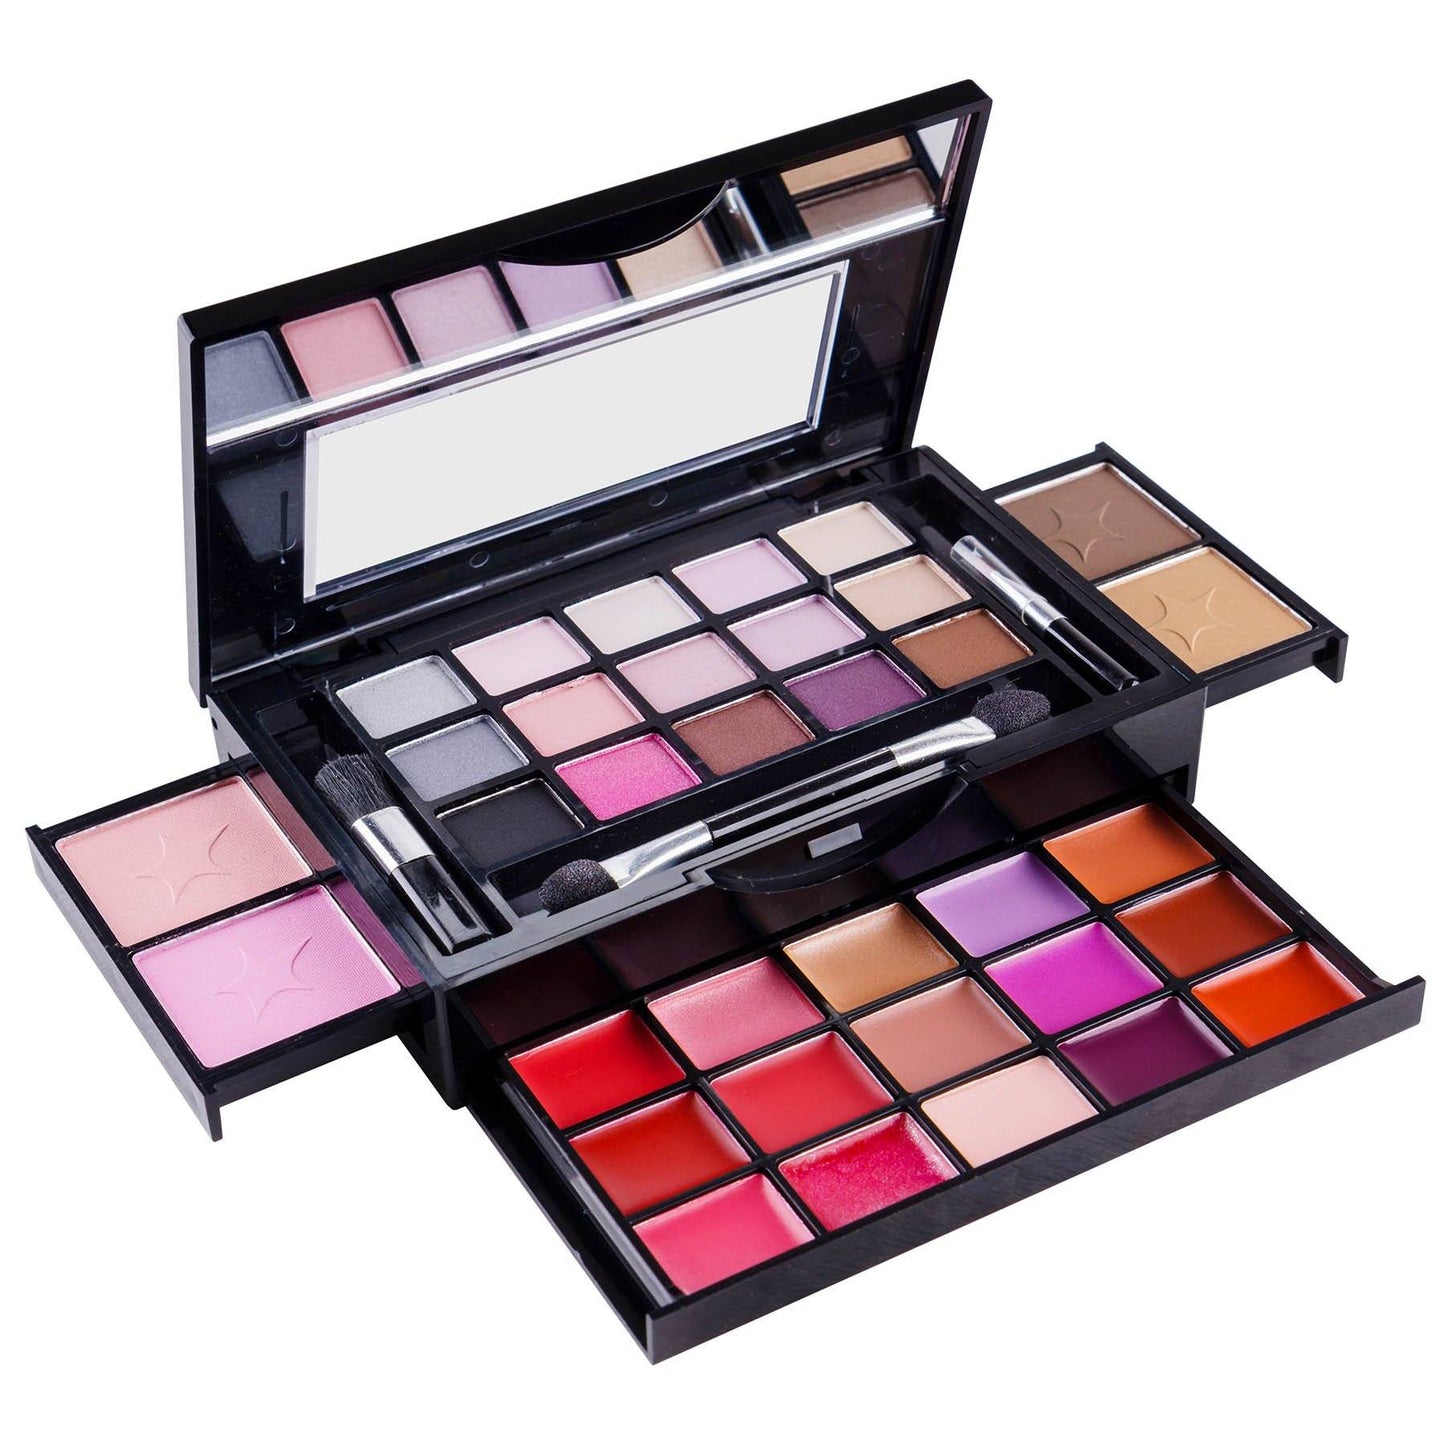 SHANY Fierce & Flawless All-in-One Makeup Set Compact with Mirror, 15 Eye Shadows, 2 Bronzers, 2 Blushes and 15 Lip/Eye Glosses - Applicators Included - SHOP  - MAKEUP SETS - ITEM# SH-4003